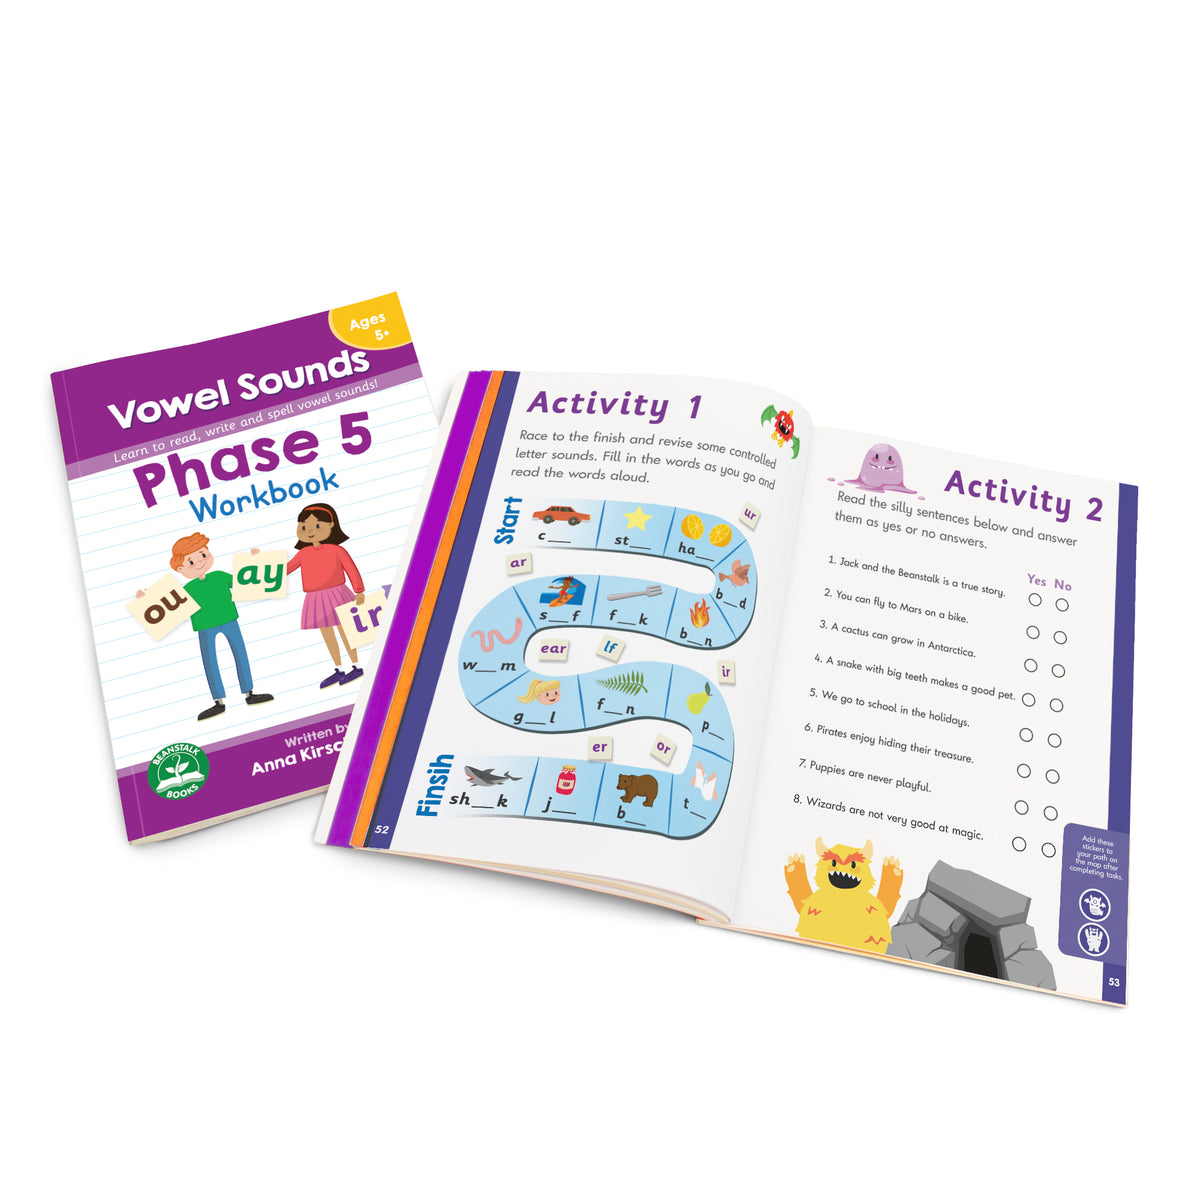 Phase 5 Vowel Sounds Workbook - 12 Pack cover and spread